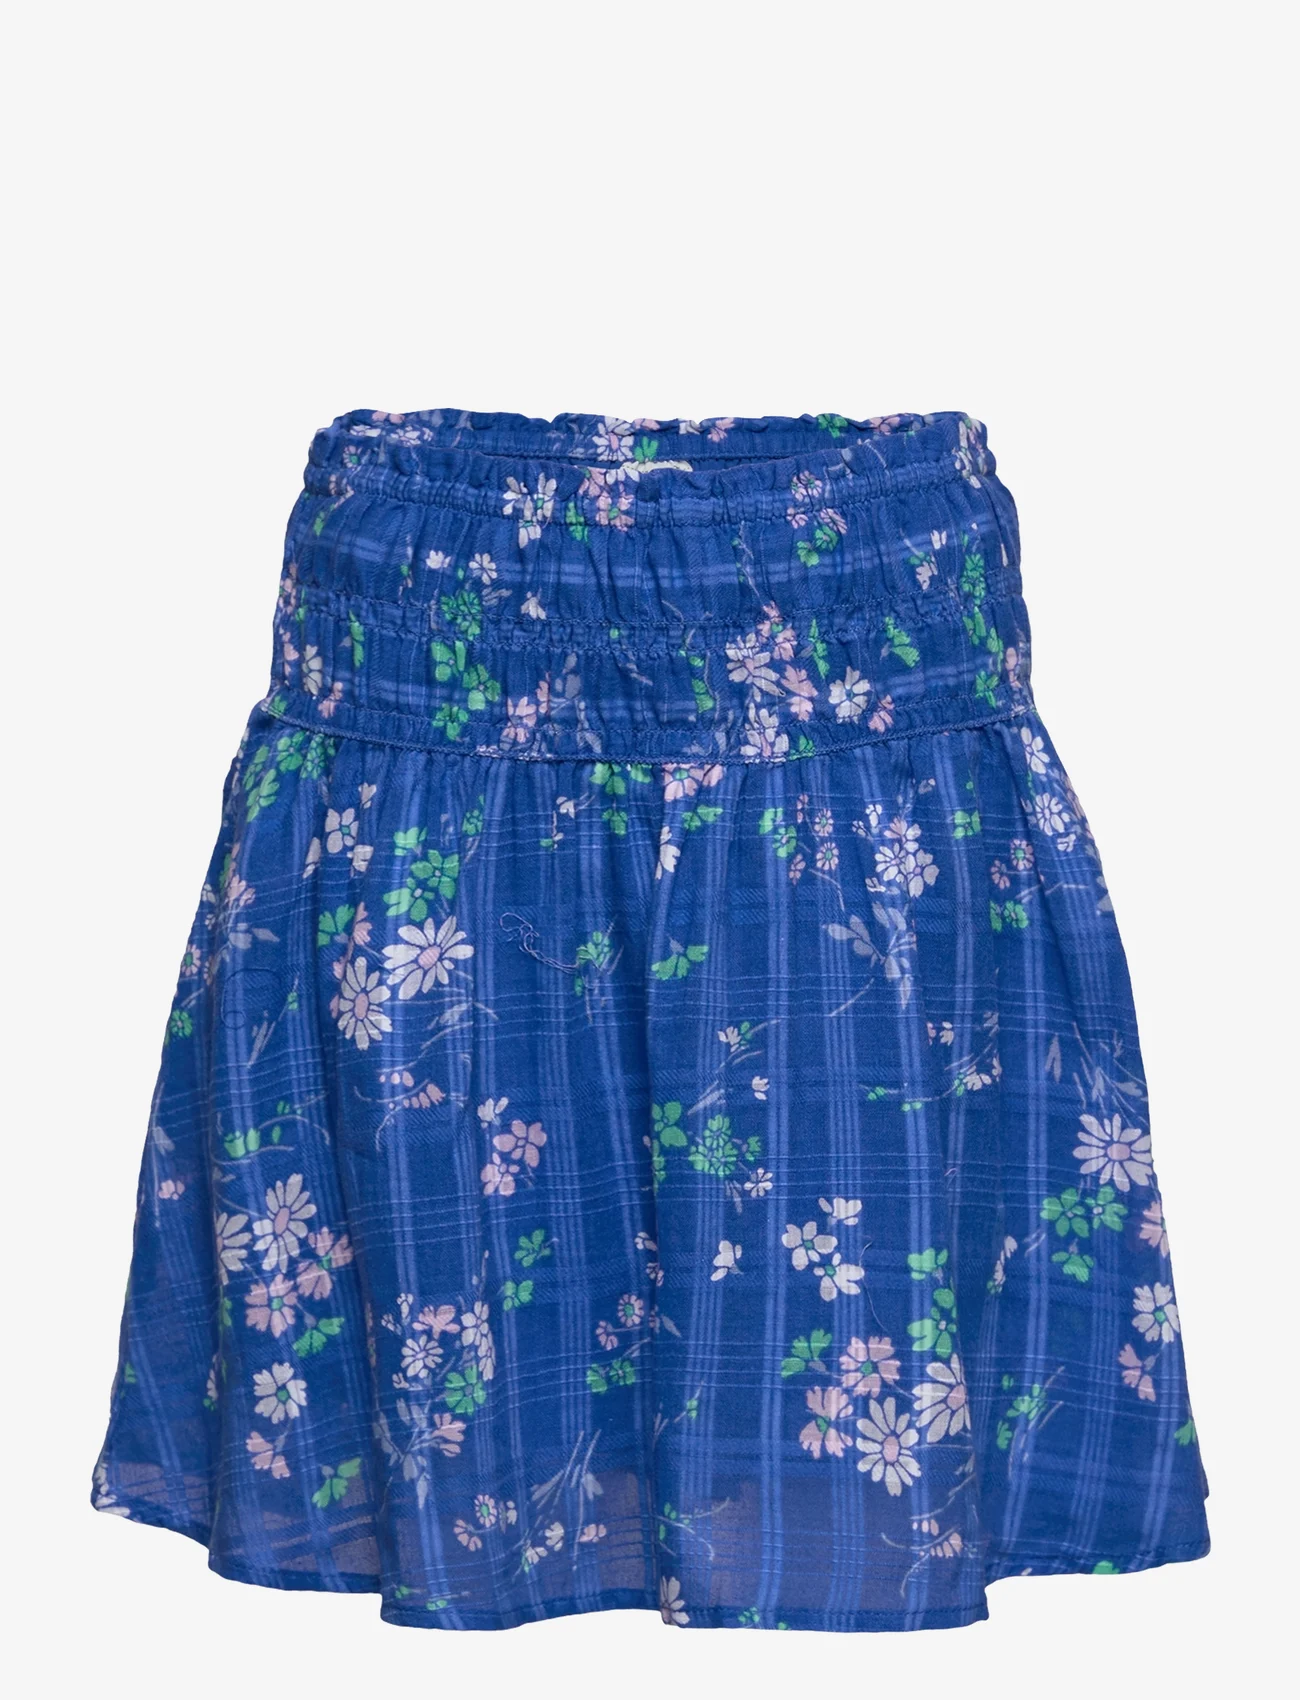 Abercrombie & Fitch - kids GIRLS SKIRTS - short skirts - blue floral - 0